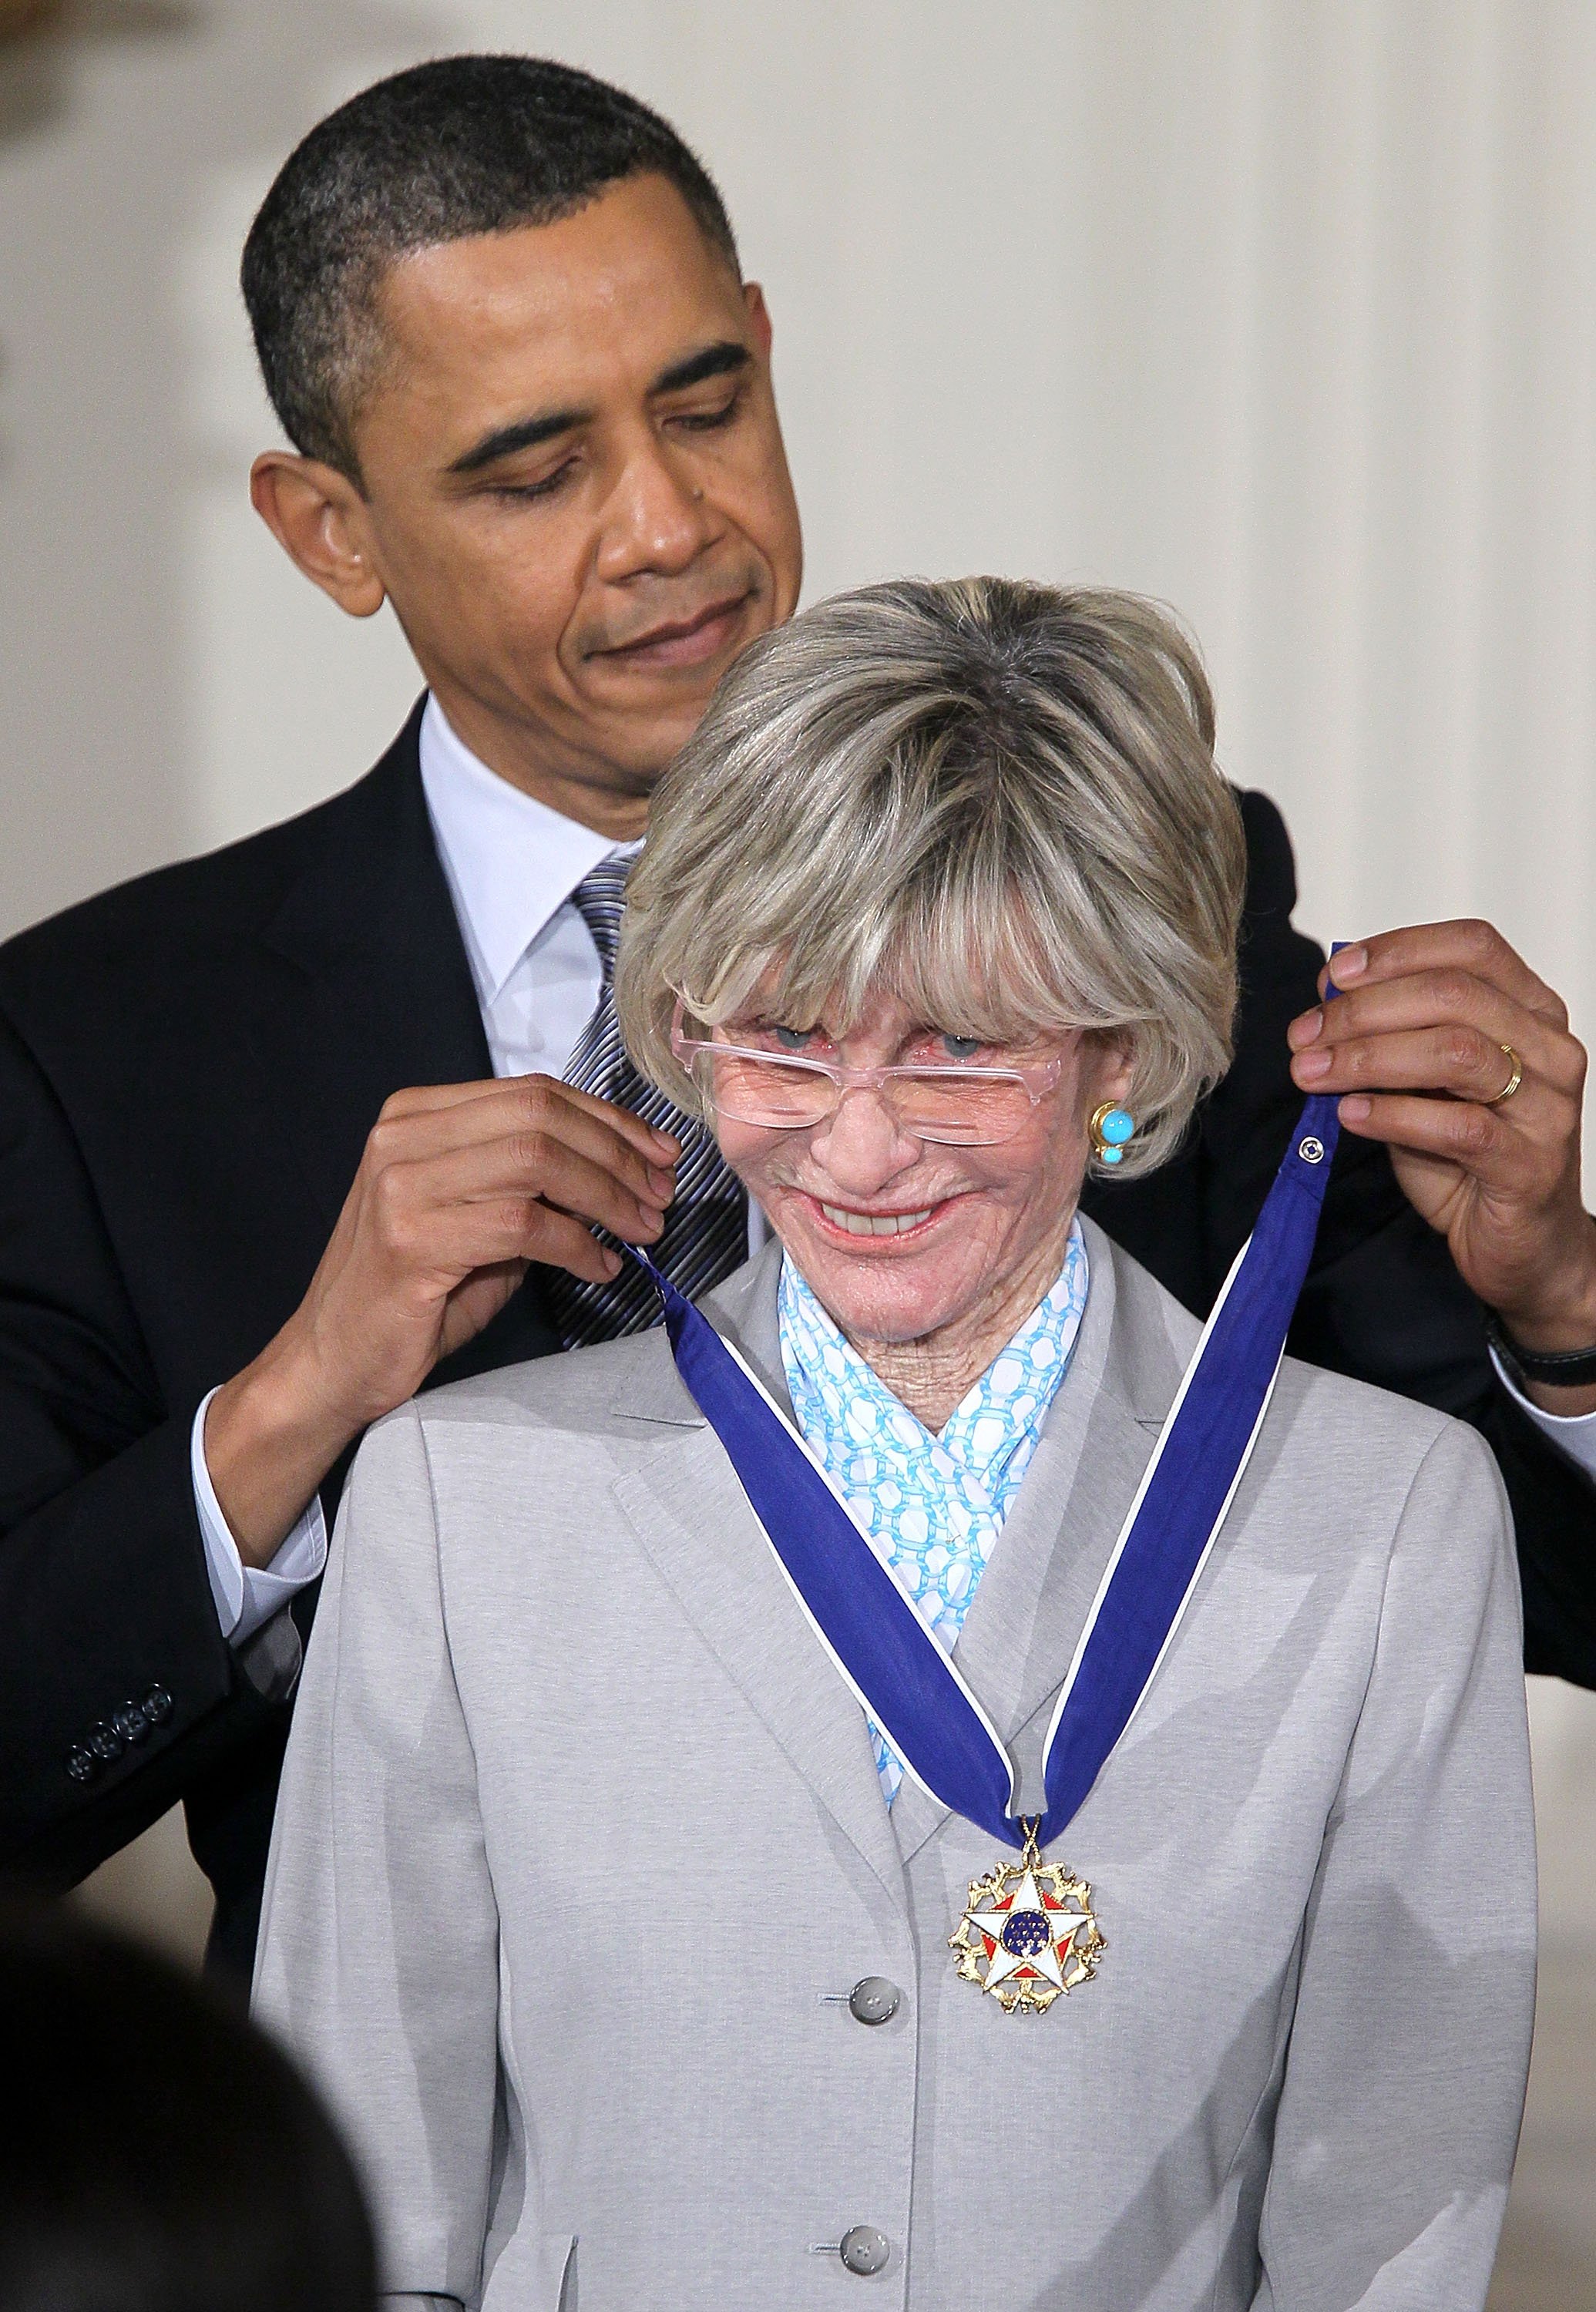 ean Kennedy Smith is presented with the 2010 Medal of Freedom by U.S. President Barack Obama in the White House on  February 15, 2011 | Photo: Getty Images